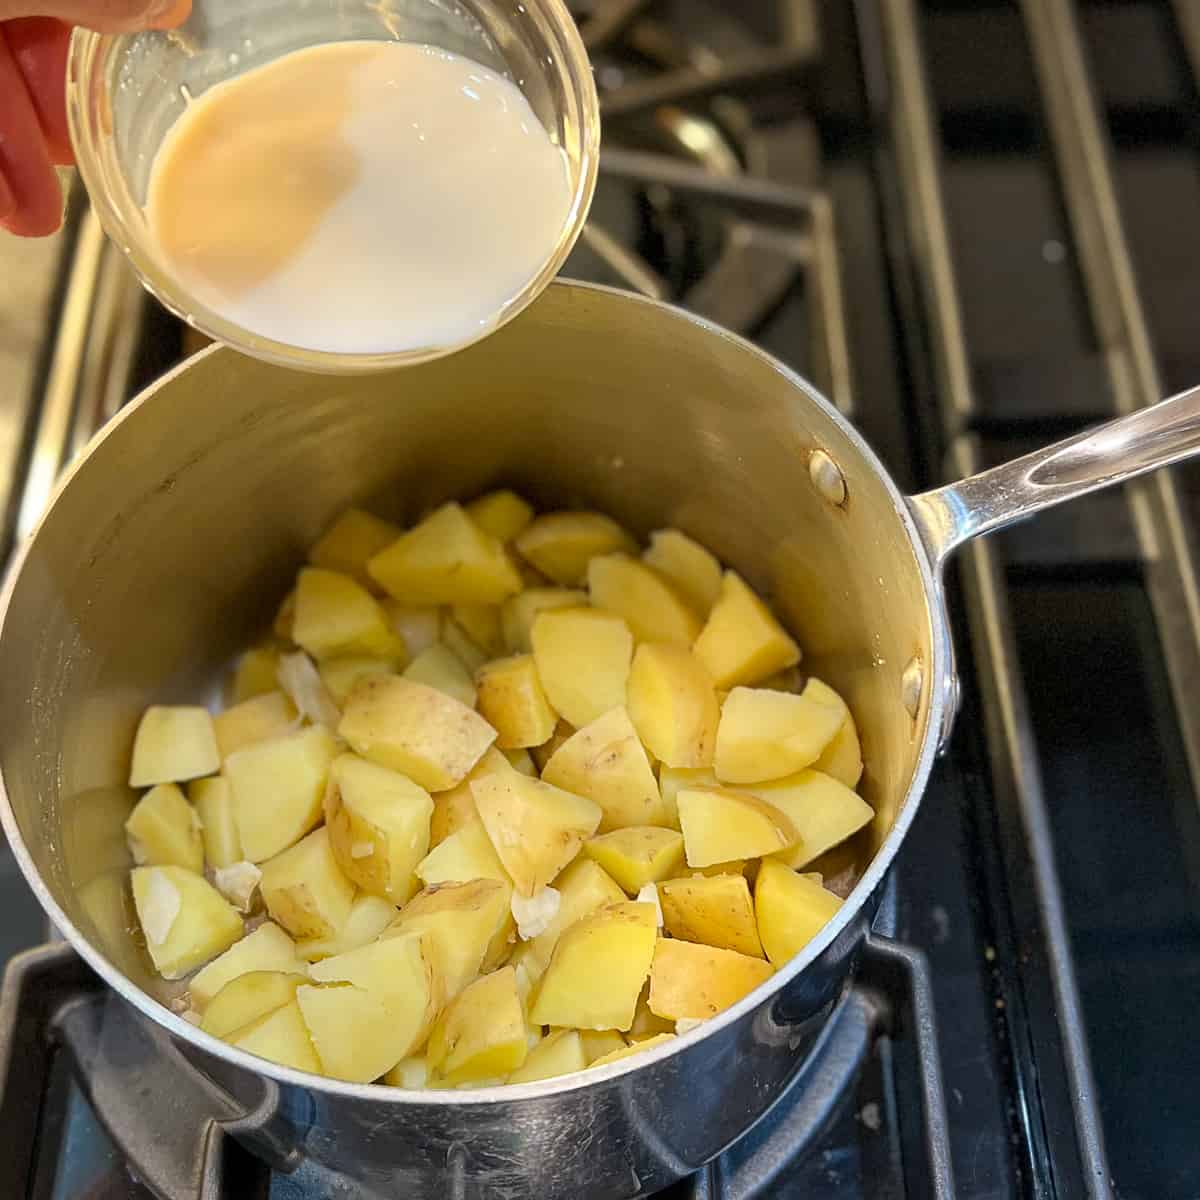 soymilk being added to cooked potatoes